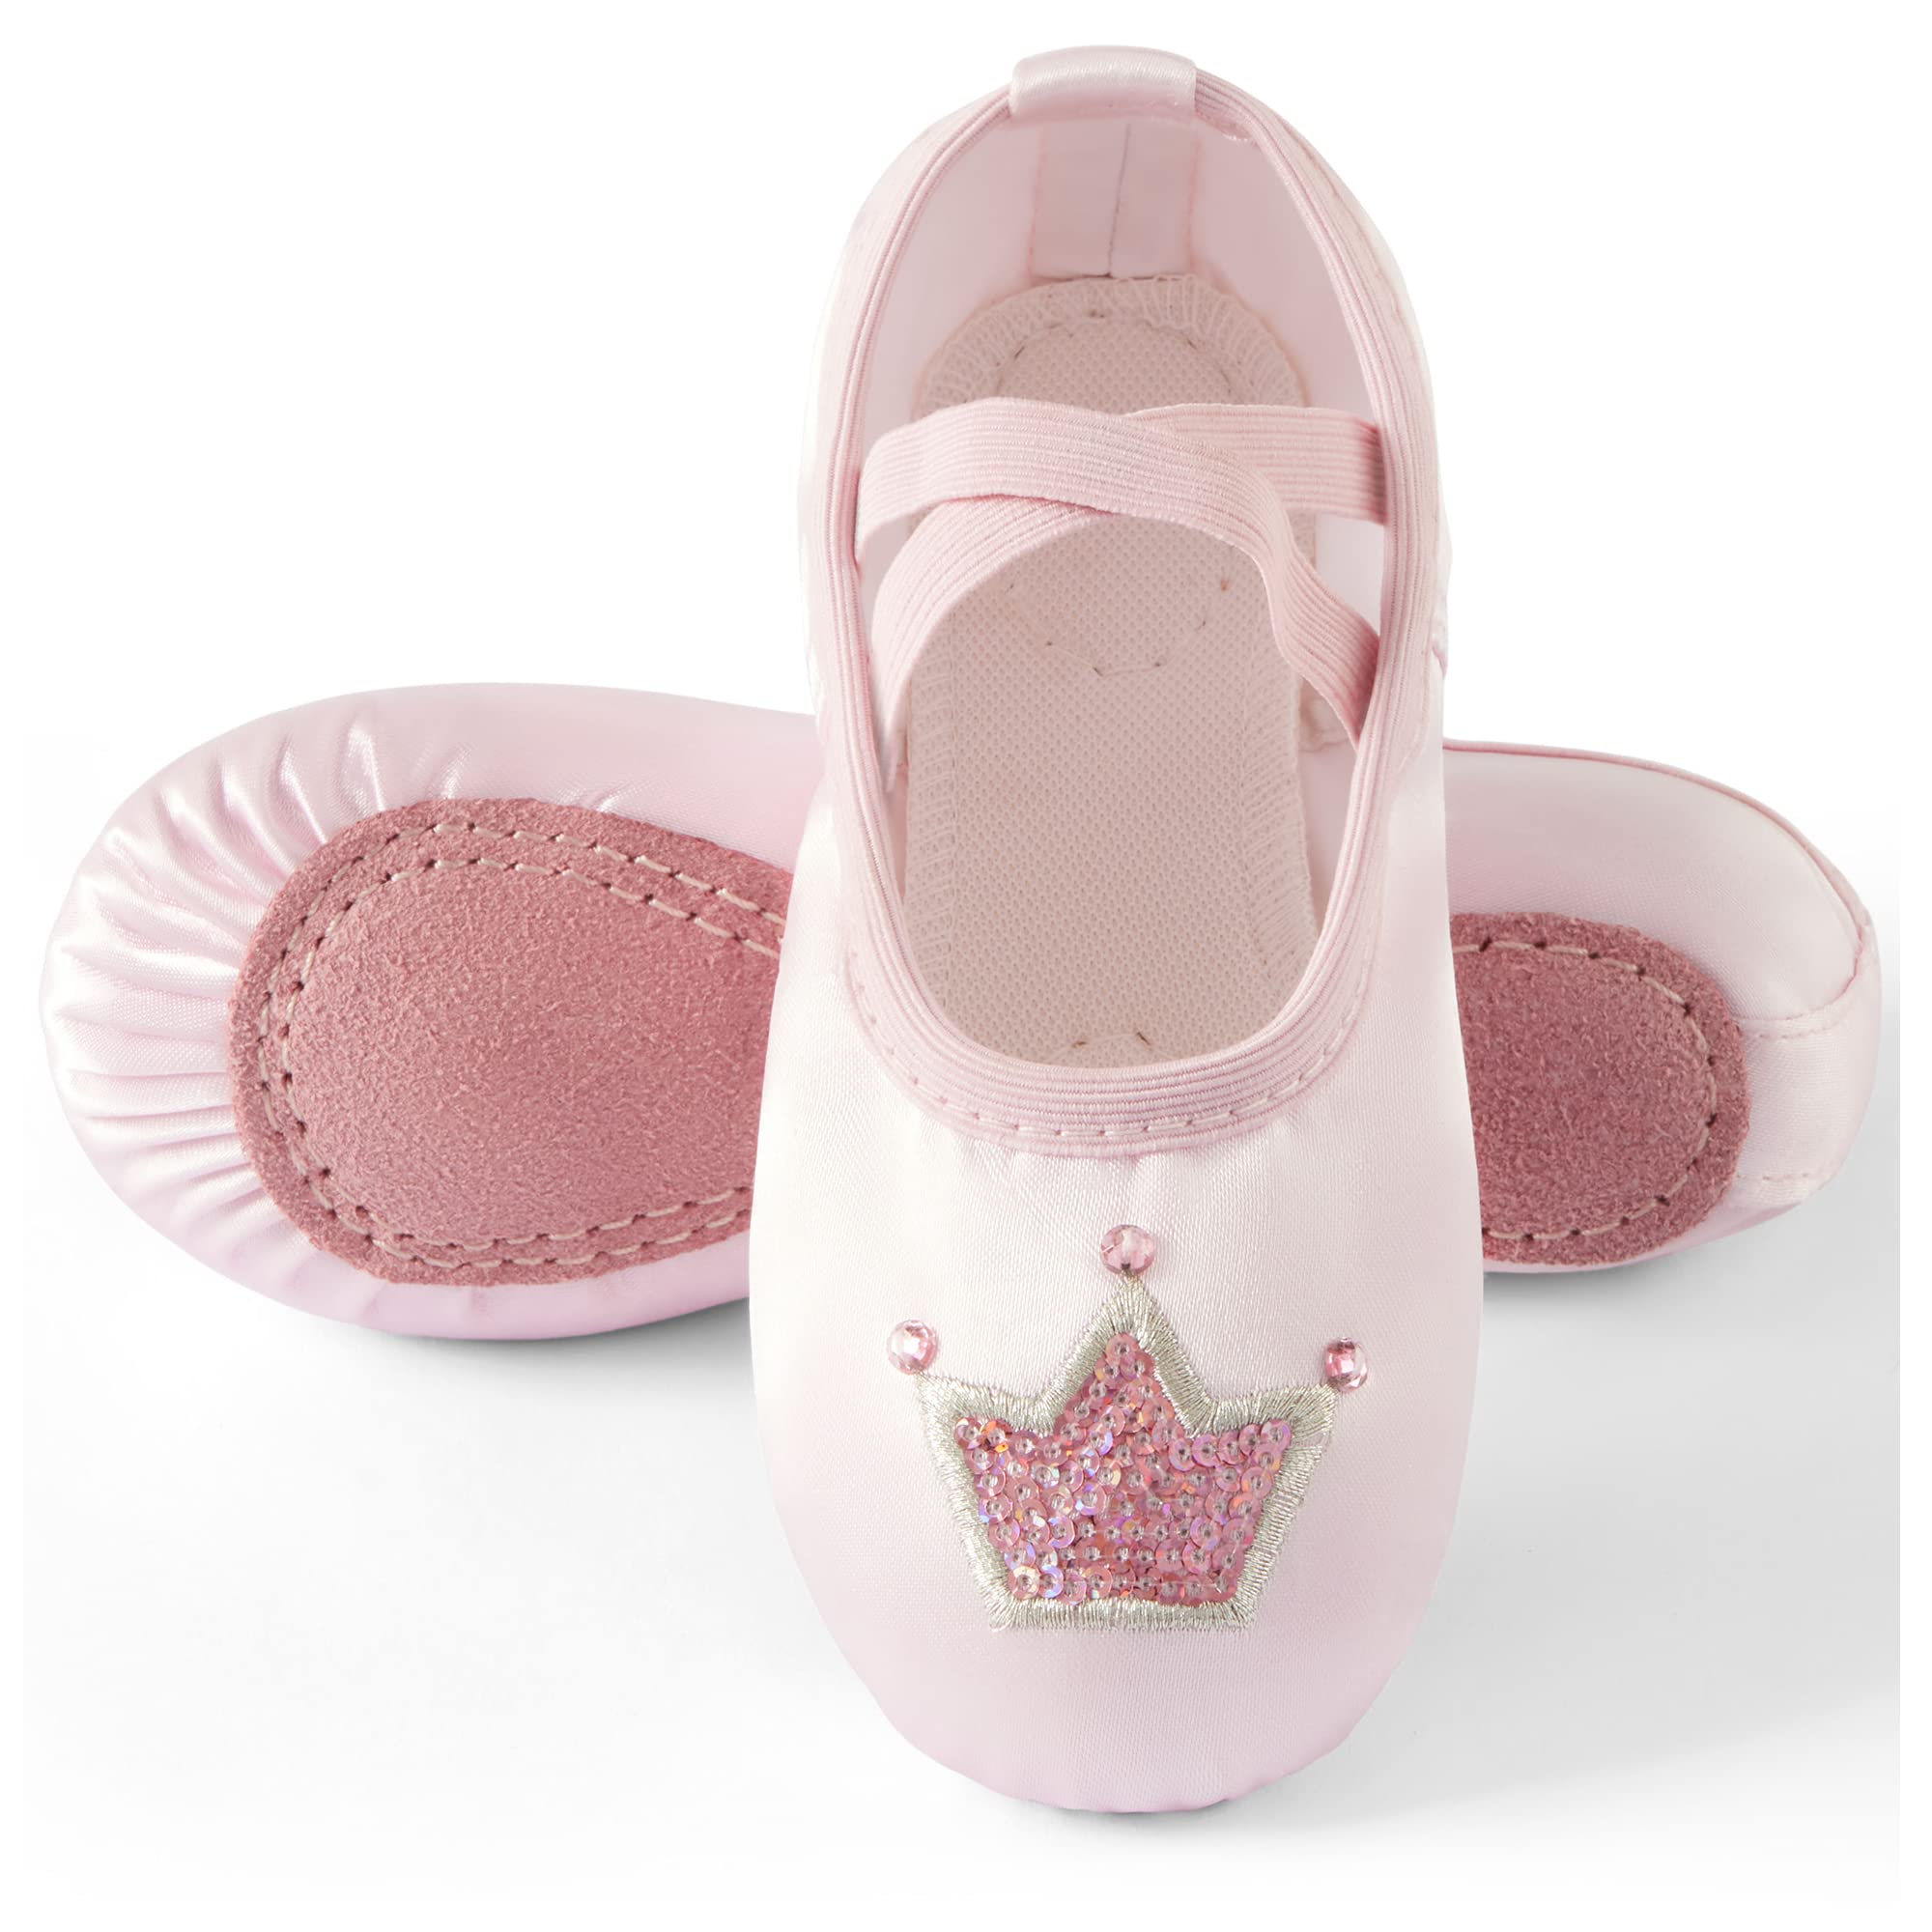  DoGeek Satin Pointe Shoes for Girls and Ladies Professional  Ballet Dance Shoes with Ribbon for School or Home (Choose One Size Larger)  